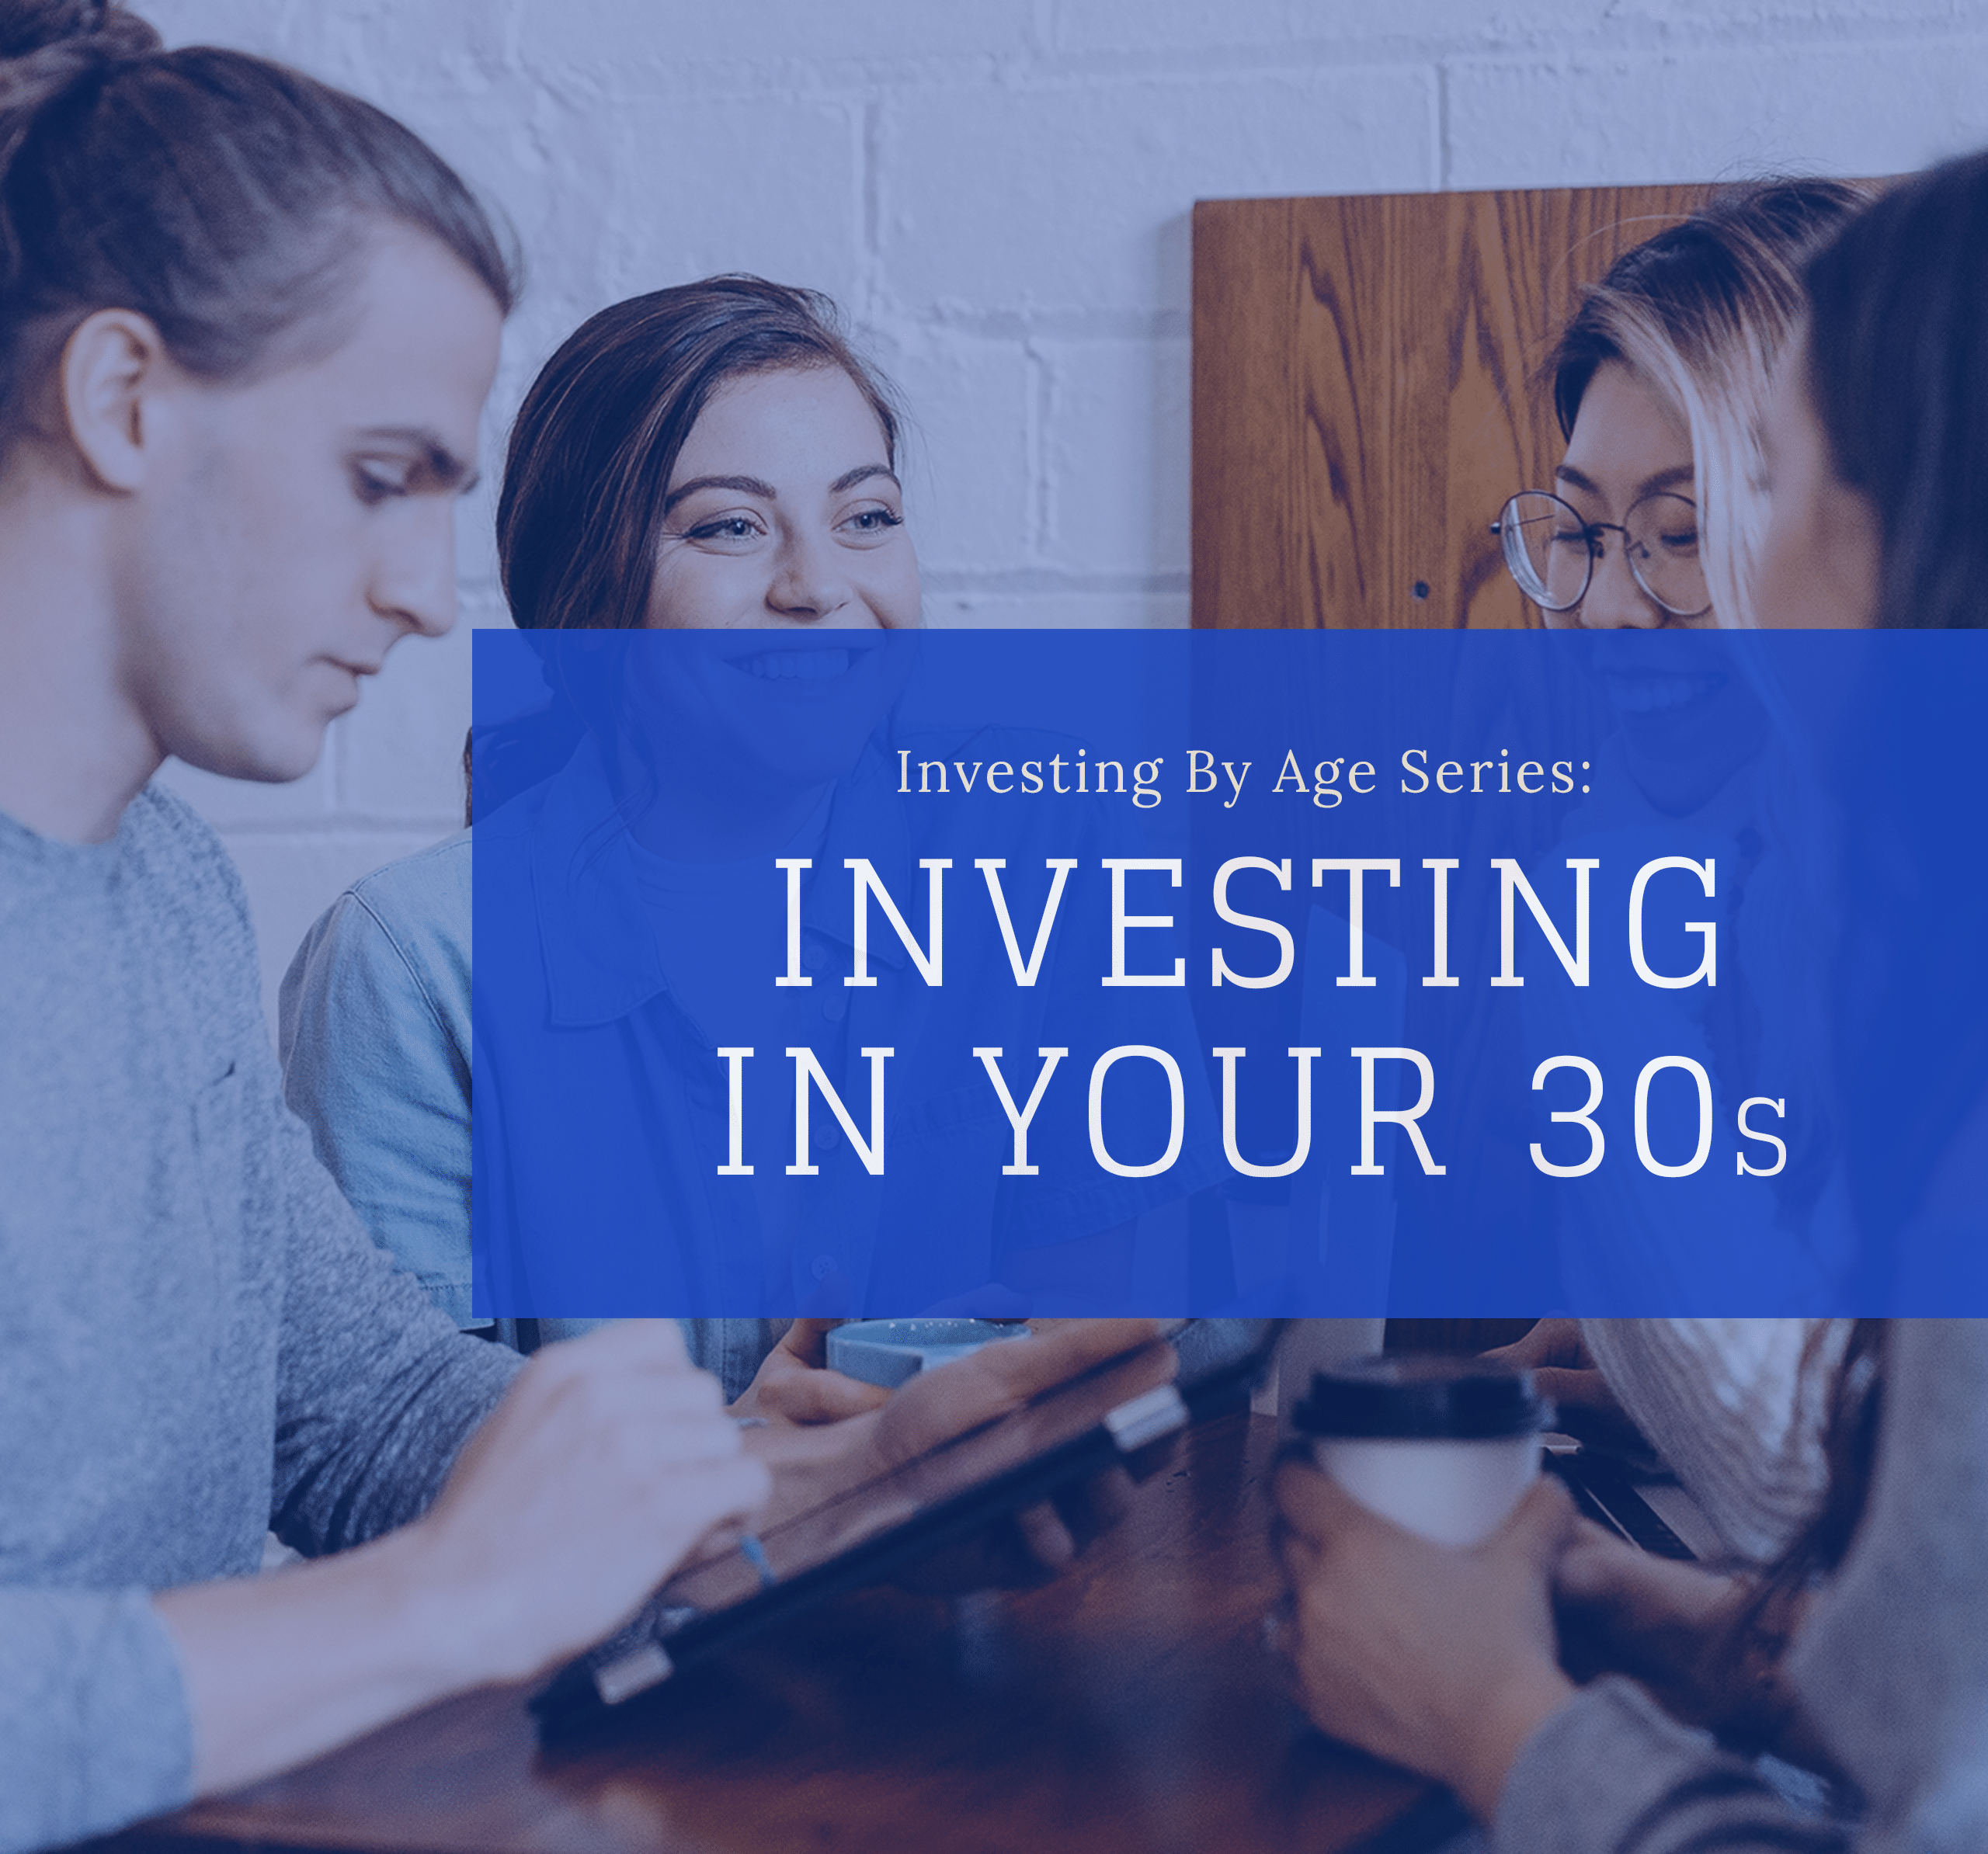 Investing By Age Series: Investing In Your 30s